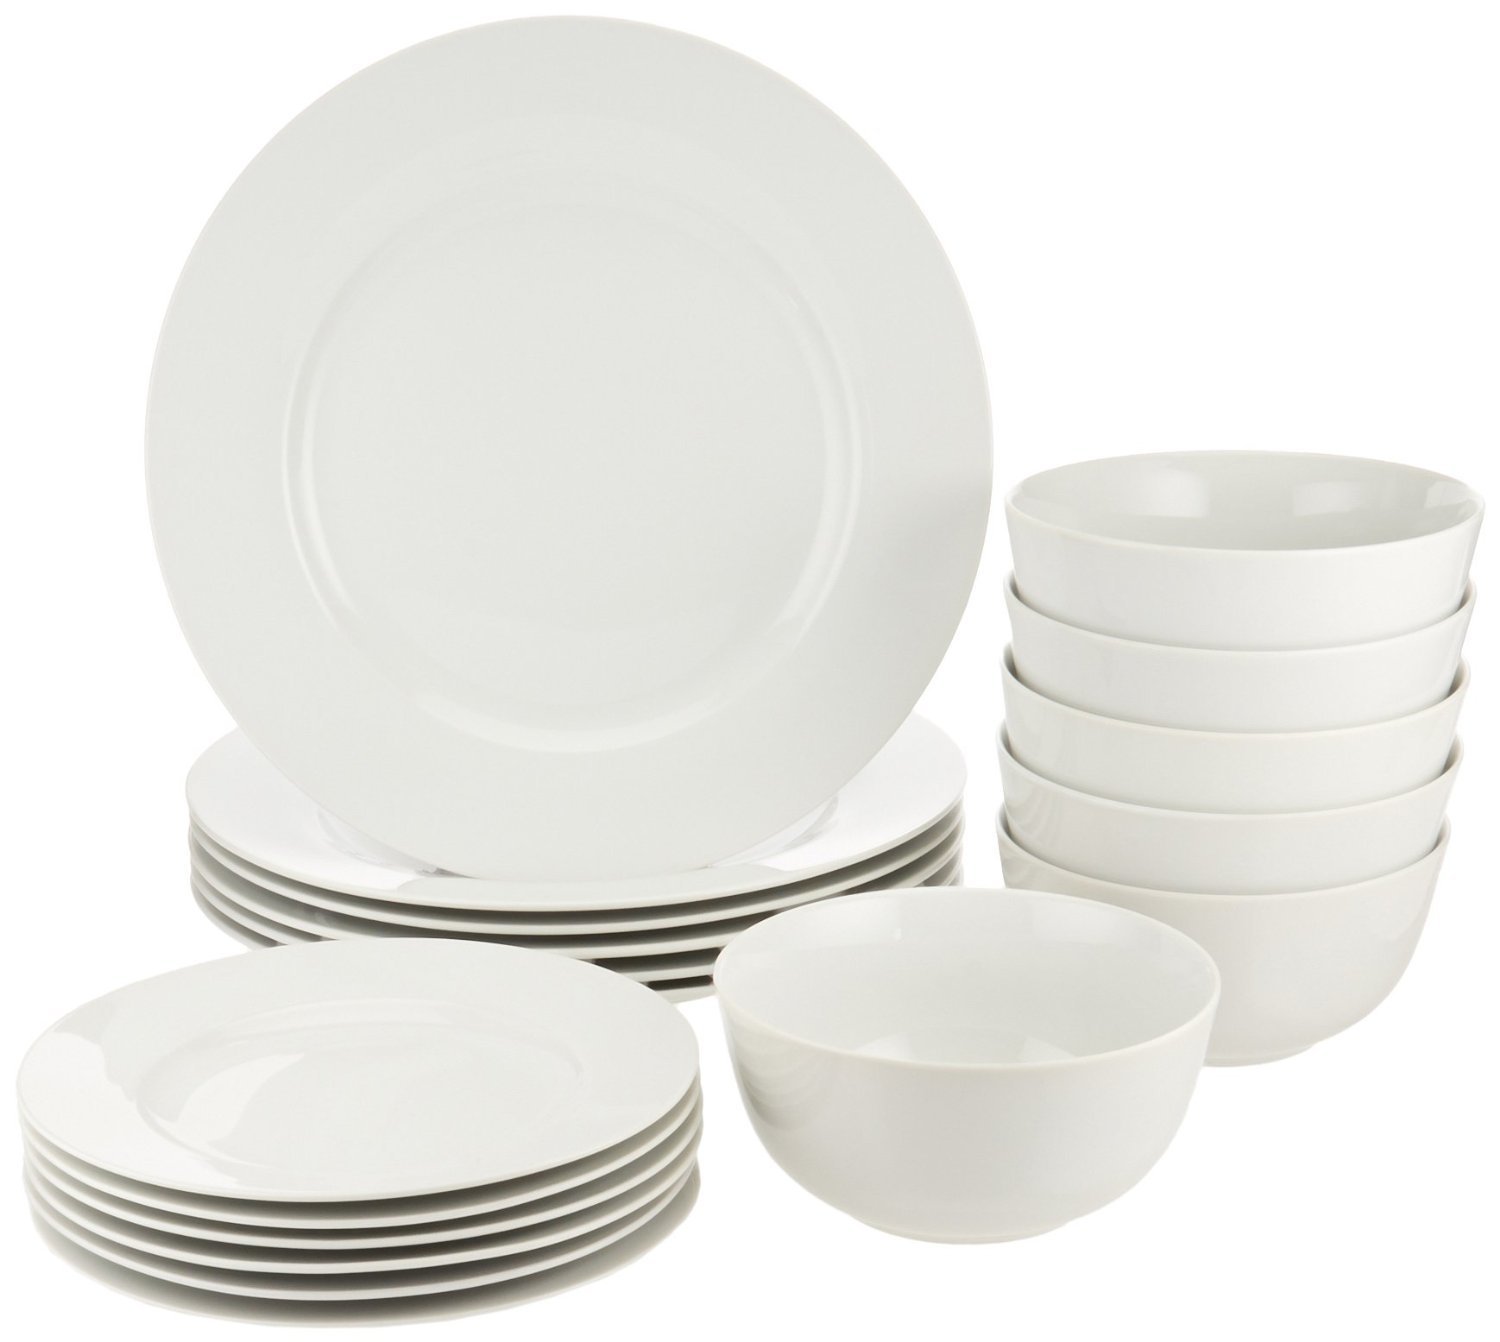 16 Piece Dishes Set Famiware Dawn Dinnerware Set Plates and Bowls Set for 4 White Matte 